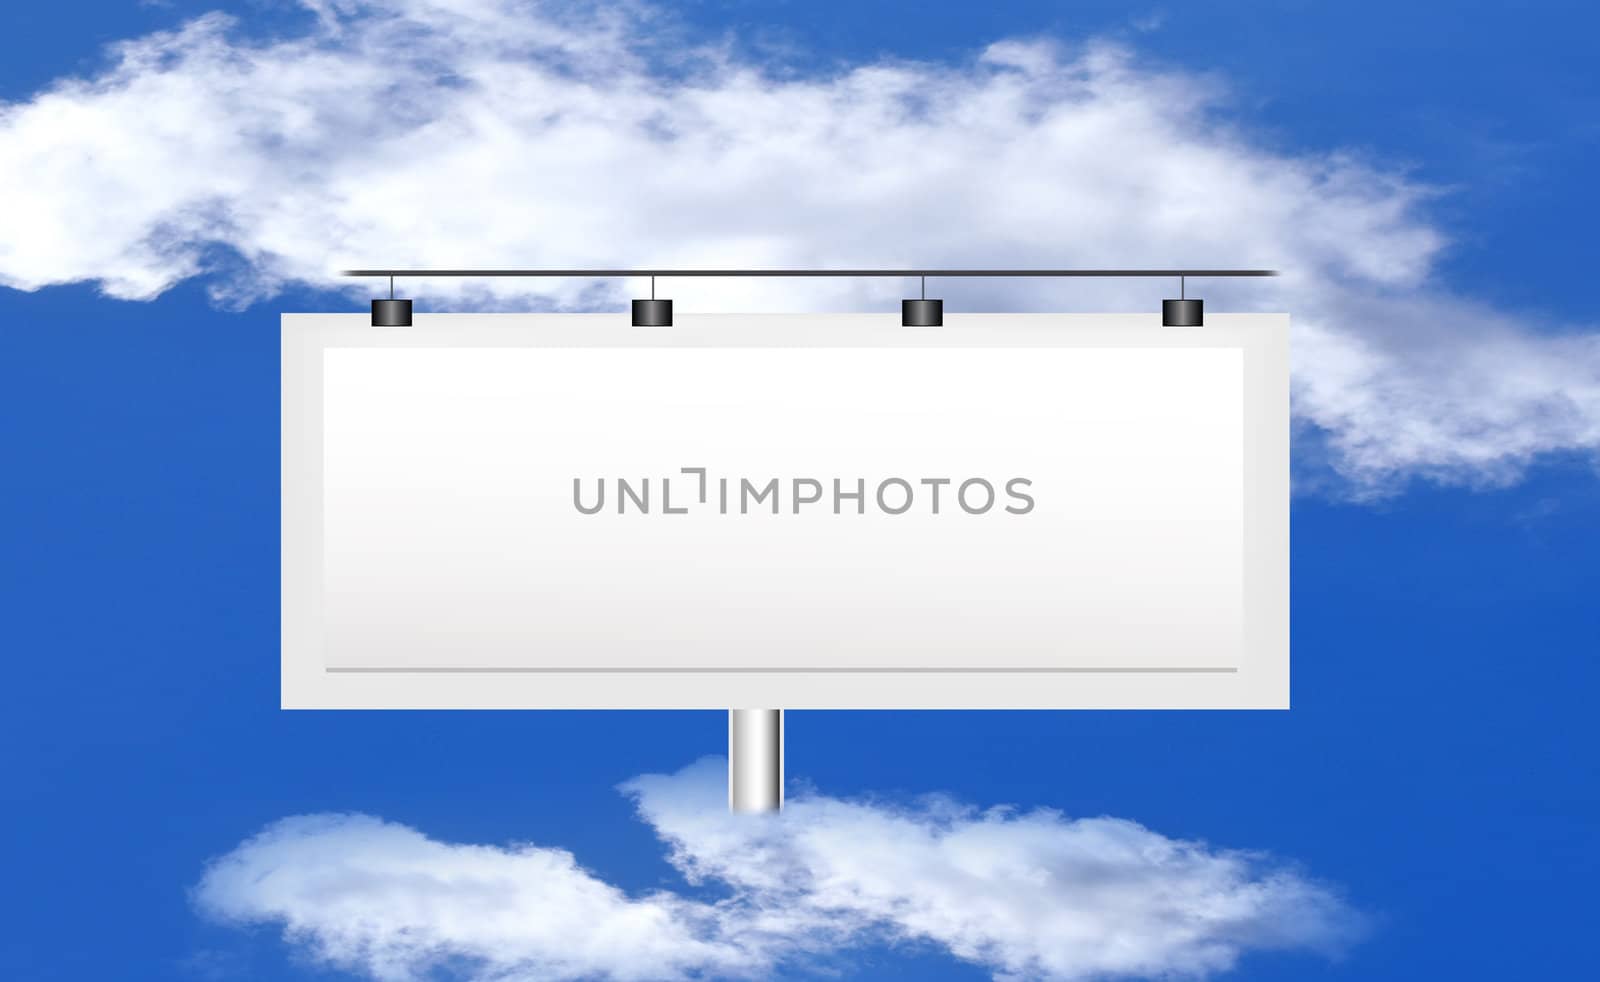 Publicity board against the bright blue cloudy sky by sergey150770SV